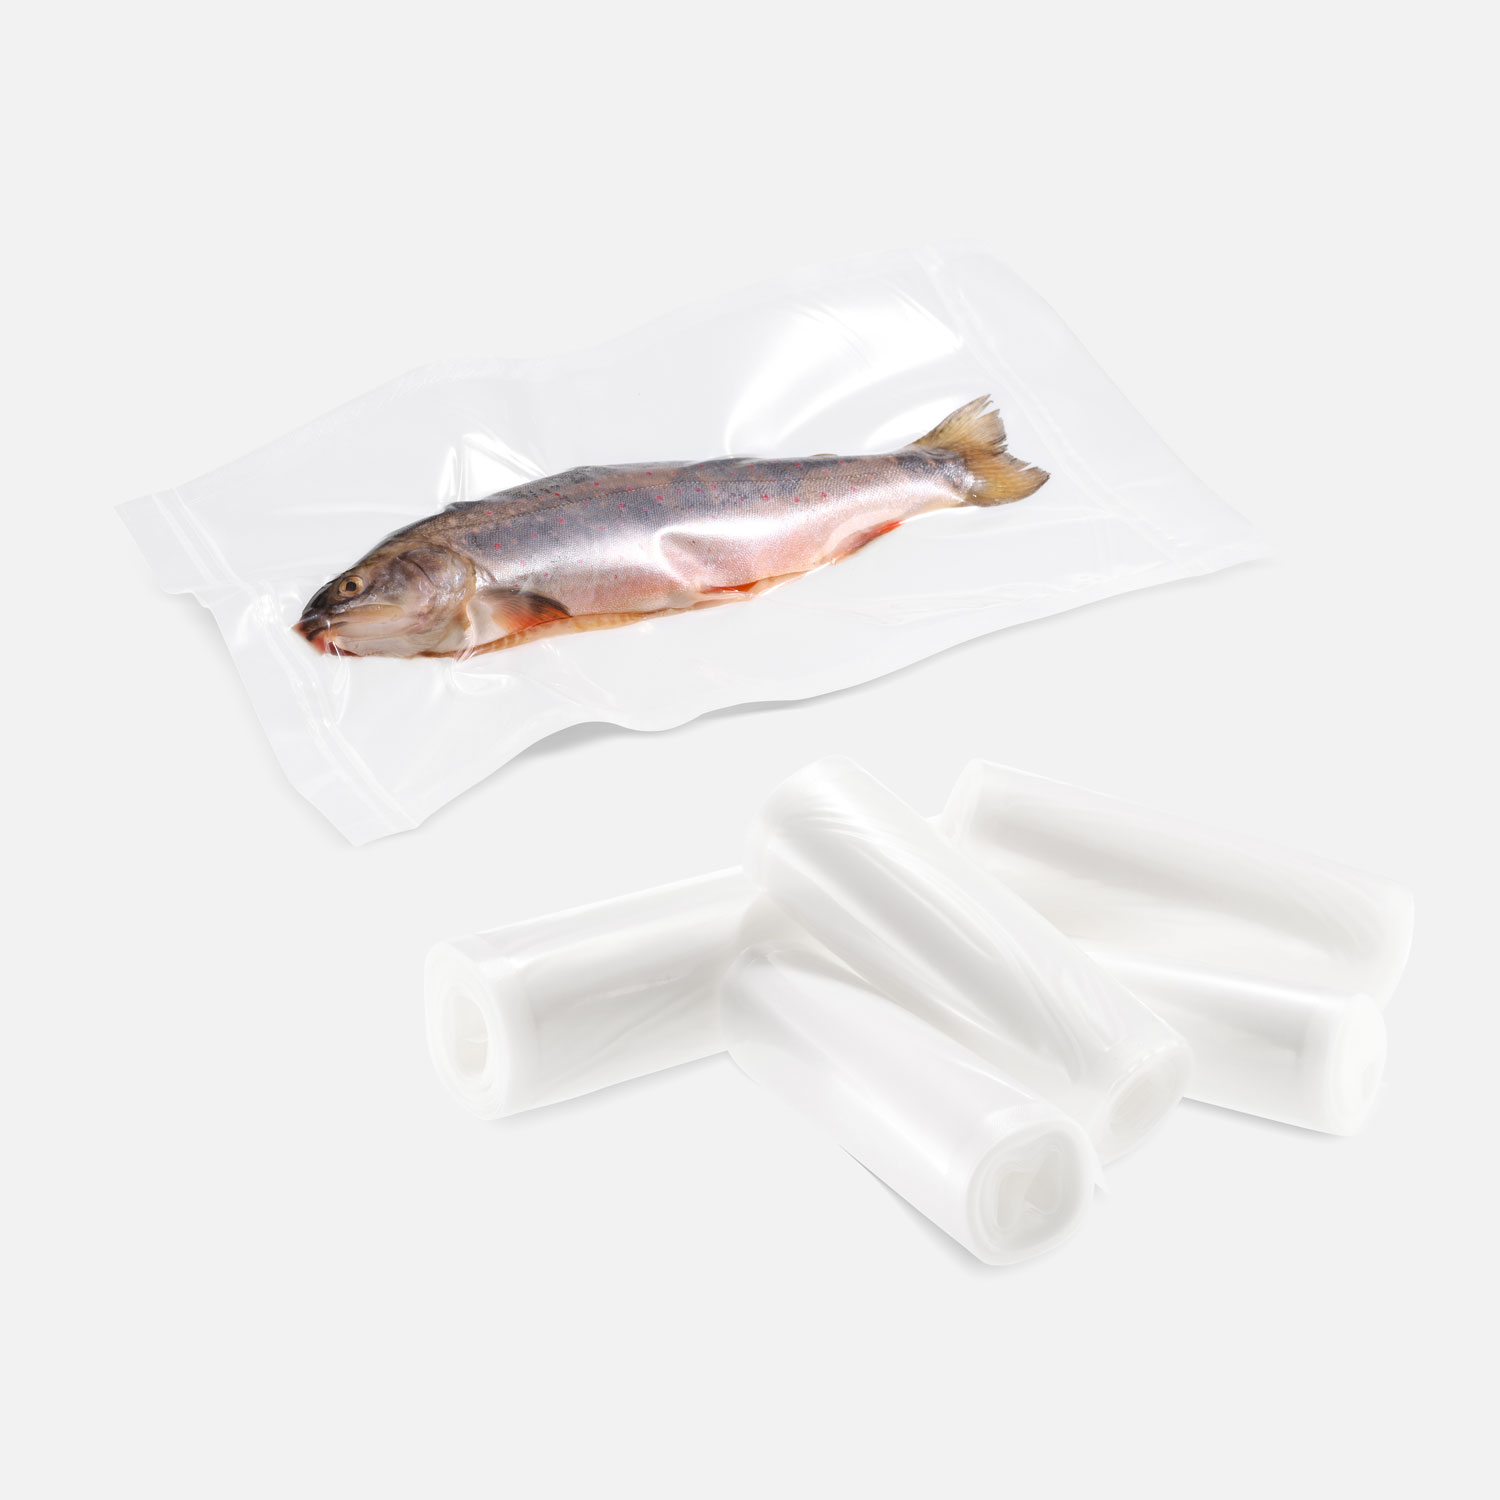 Structured vacuum roll with trout vacuum-sealed